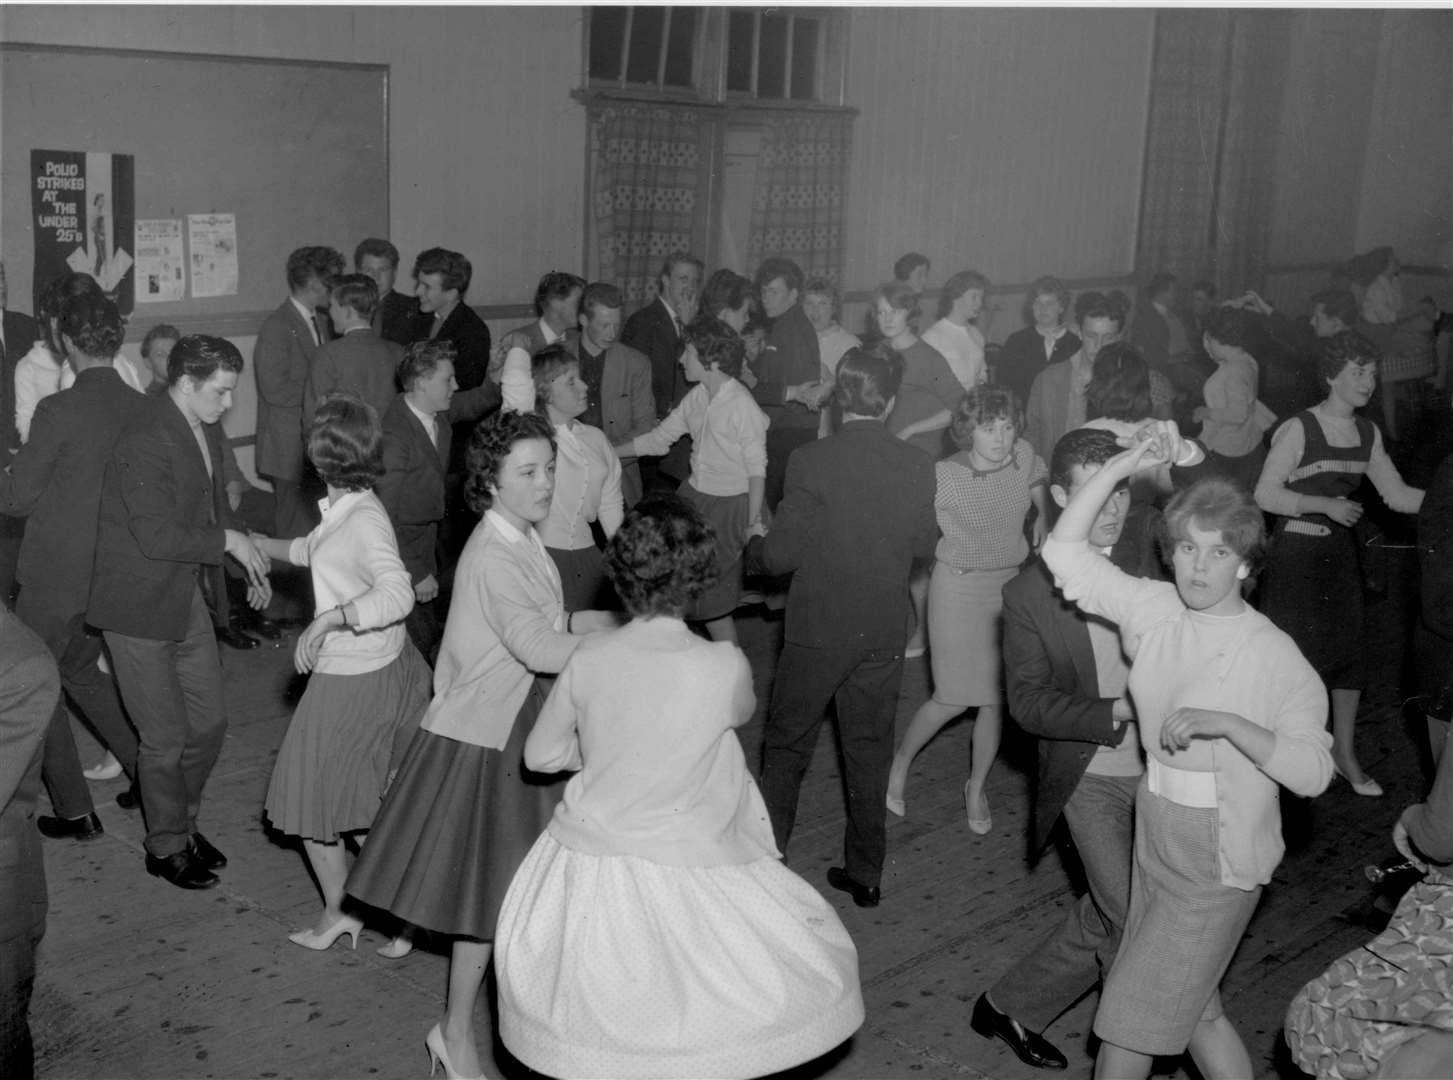 The 'most popular amusement' at the Prince of Wales Youth Club in Canterbury in May 1960 was jiving